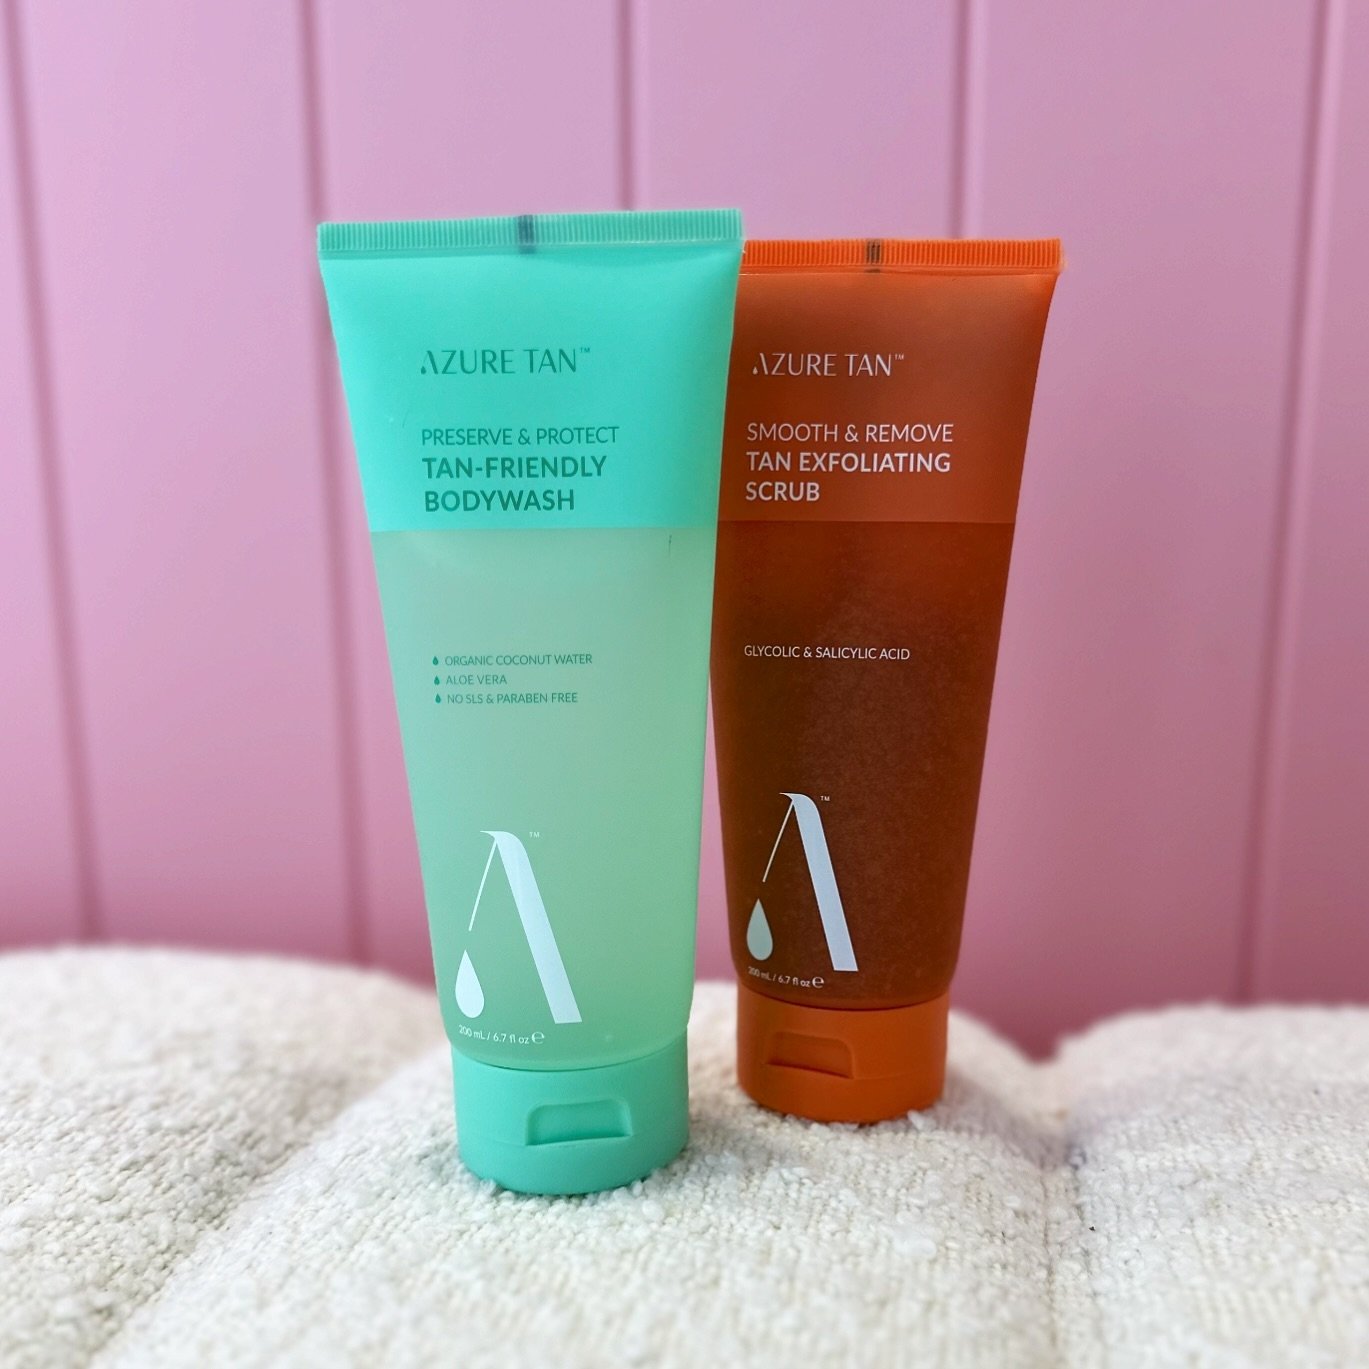 The skin prep duo everyone needs to add to their tanning routine ✨

the smooth &amp; remove exfoliator is infused with salicylic &amp; glycolic acid to perfectly prep your skin pre tan
preserve &amp; protect body wash will keep your tan looking flawl